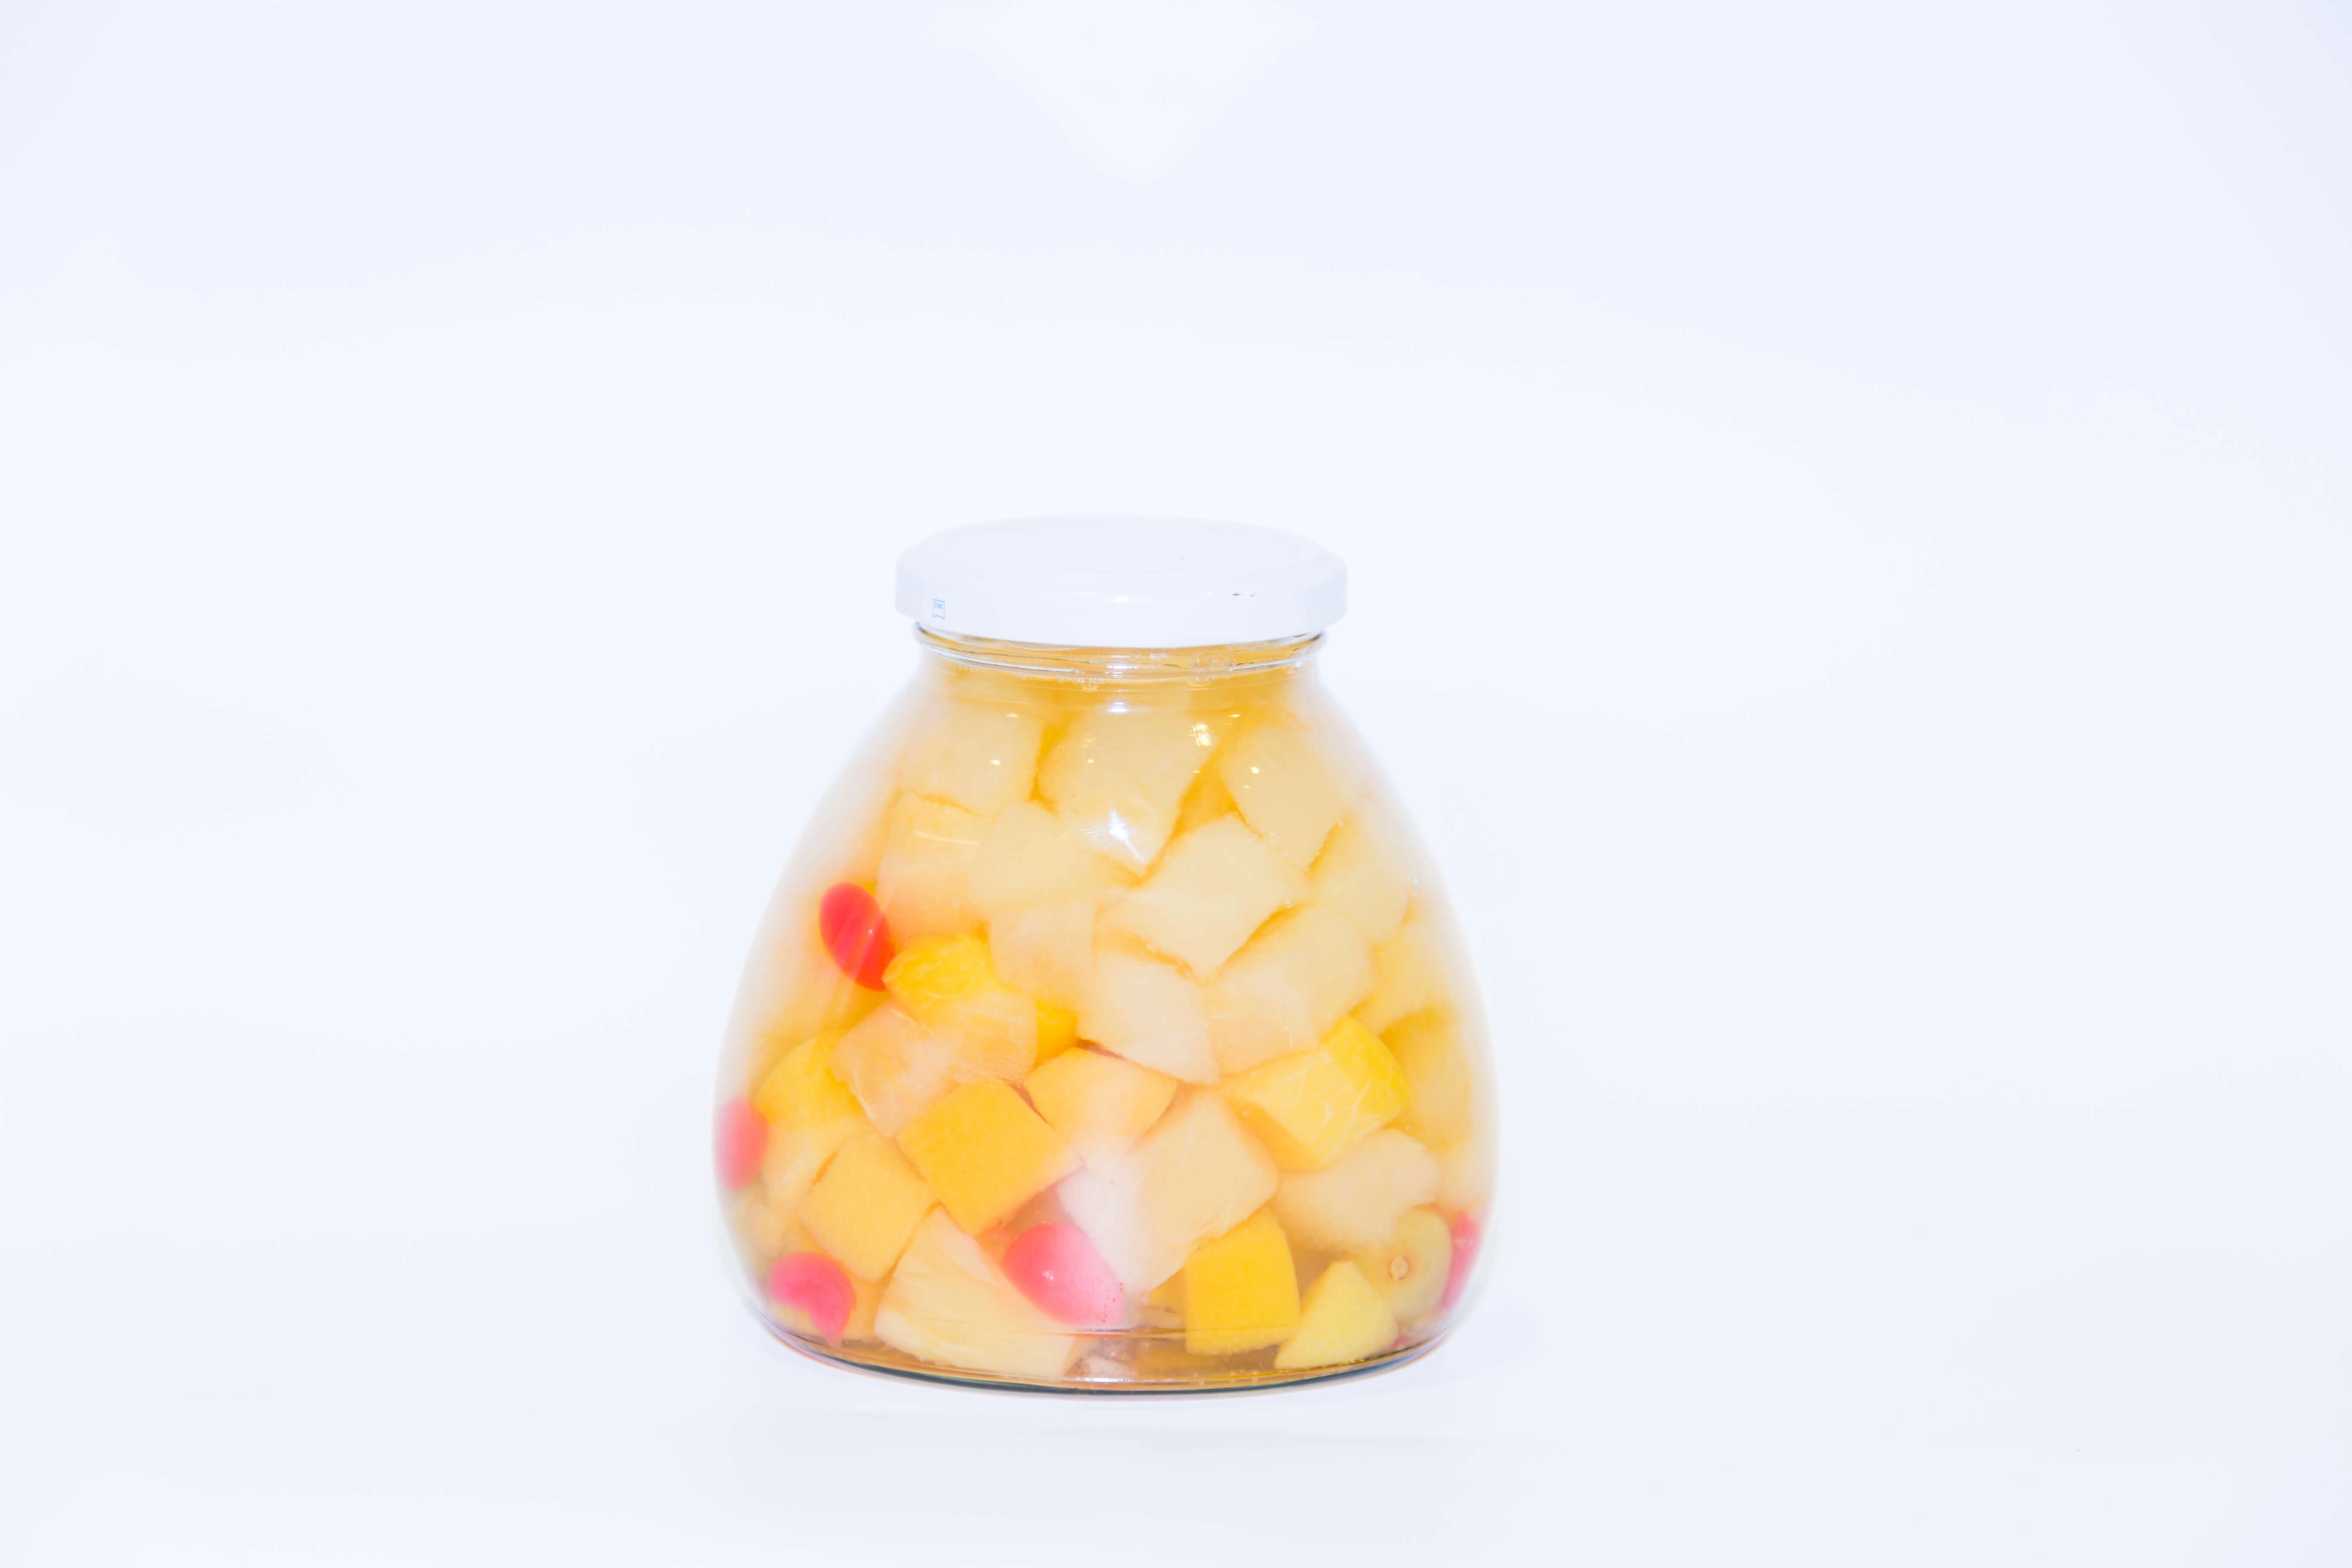 Canned Fruit Cocktail in Syrup